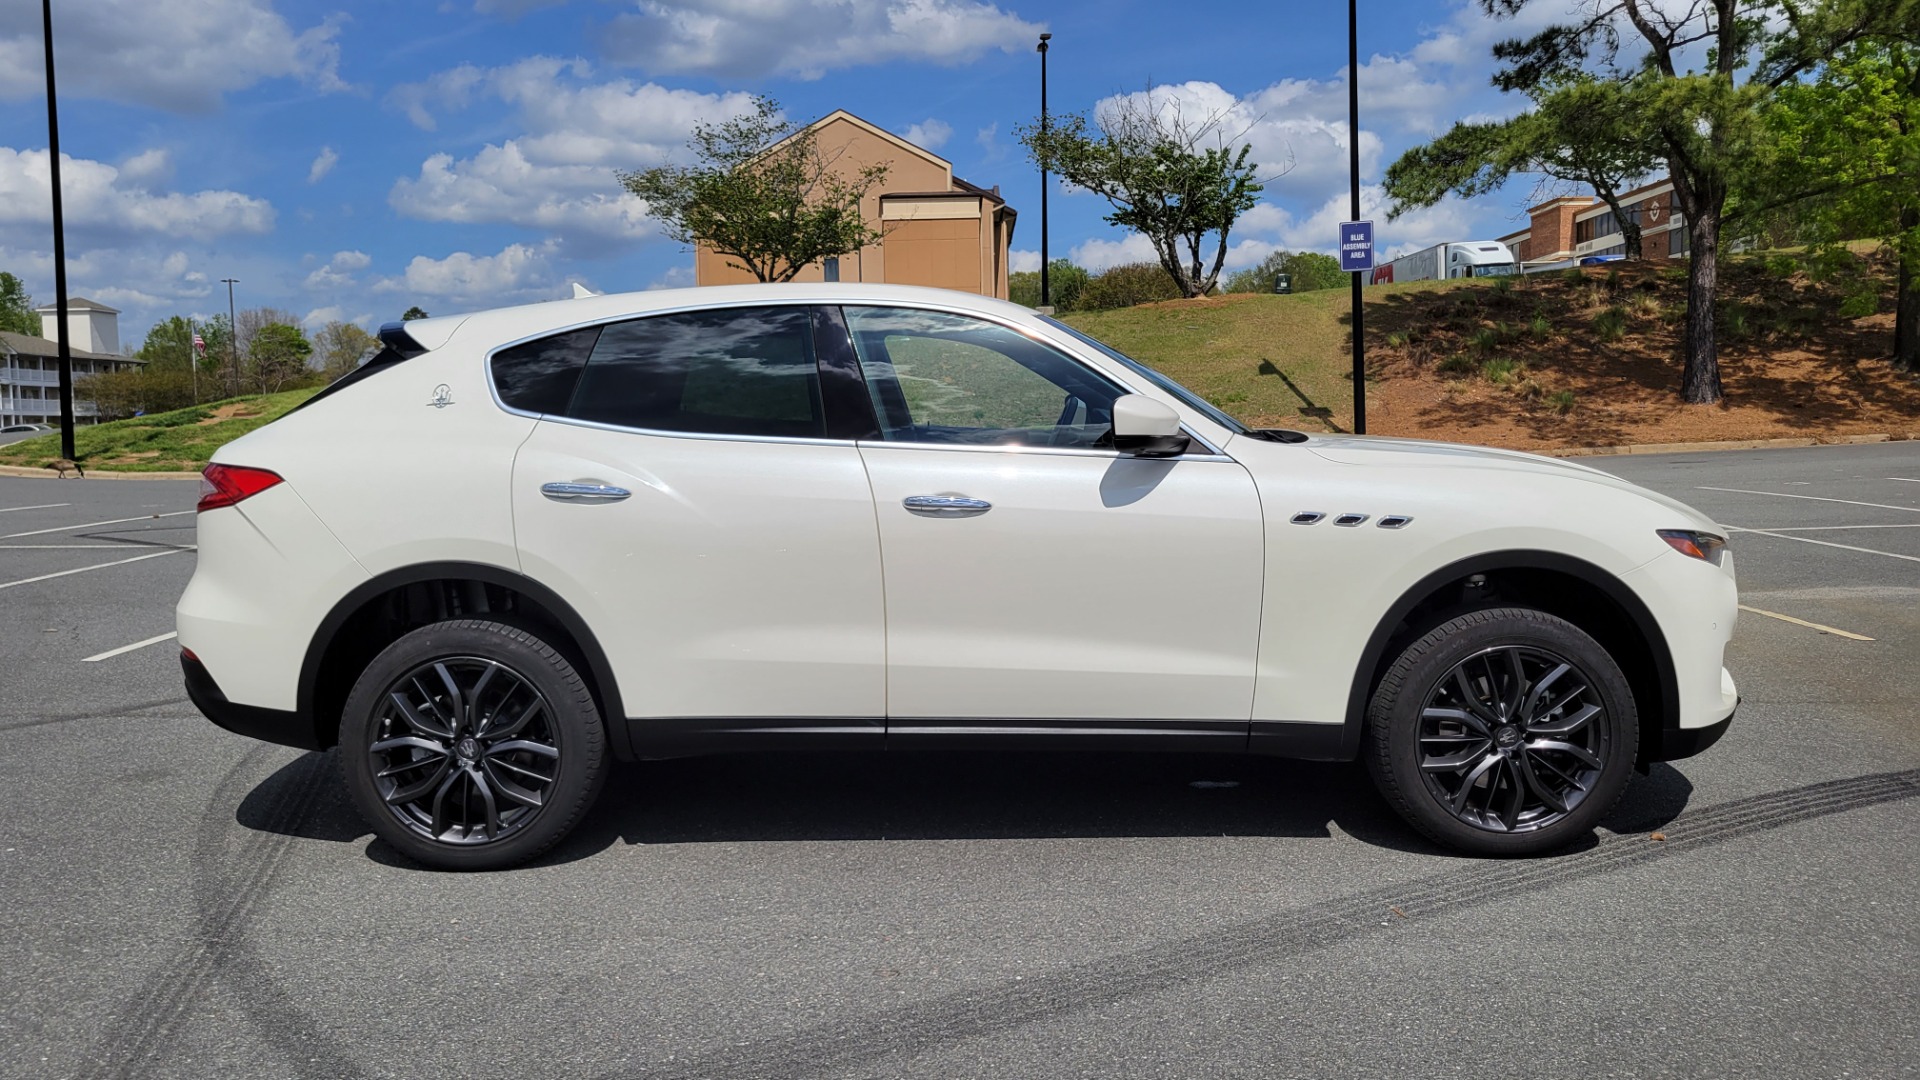 Used 2018 Maserati LEVANTE 3.0L 345HP SUV / 8-SPD / PREMIUM / BSA / NAV / 20IN WHLS / REARVIEW for sale $50,495 at Formula Imports in Charlotte NC 28227 97